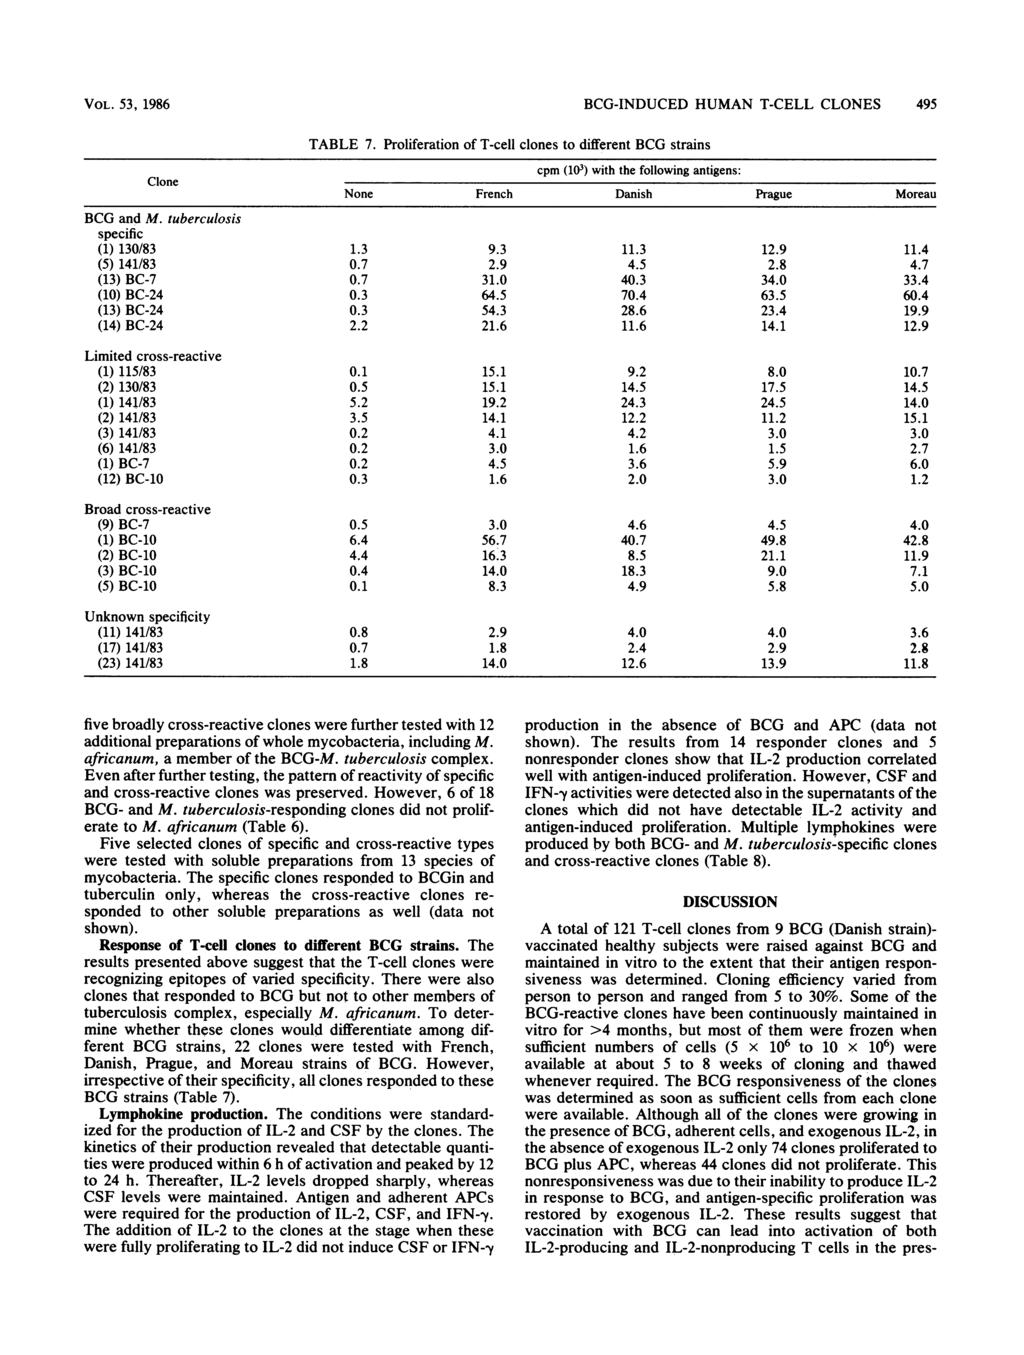 VOL. 53, 1986 BCG-INDUCED HUMAN T-CELL CLONES 495 Clone TABLE 7. Proliferation of T-cell clones to different BCG strains None French Danish Prague Moreau BCG and M. tuberculosis specific (1) 130/83 1.